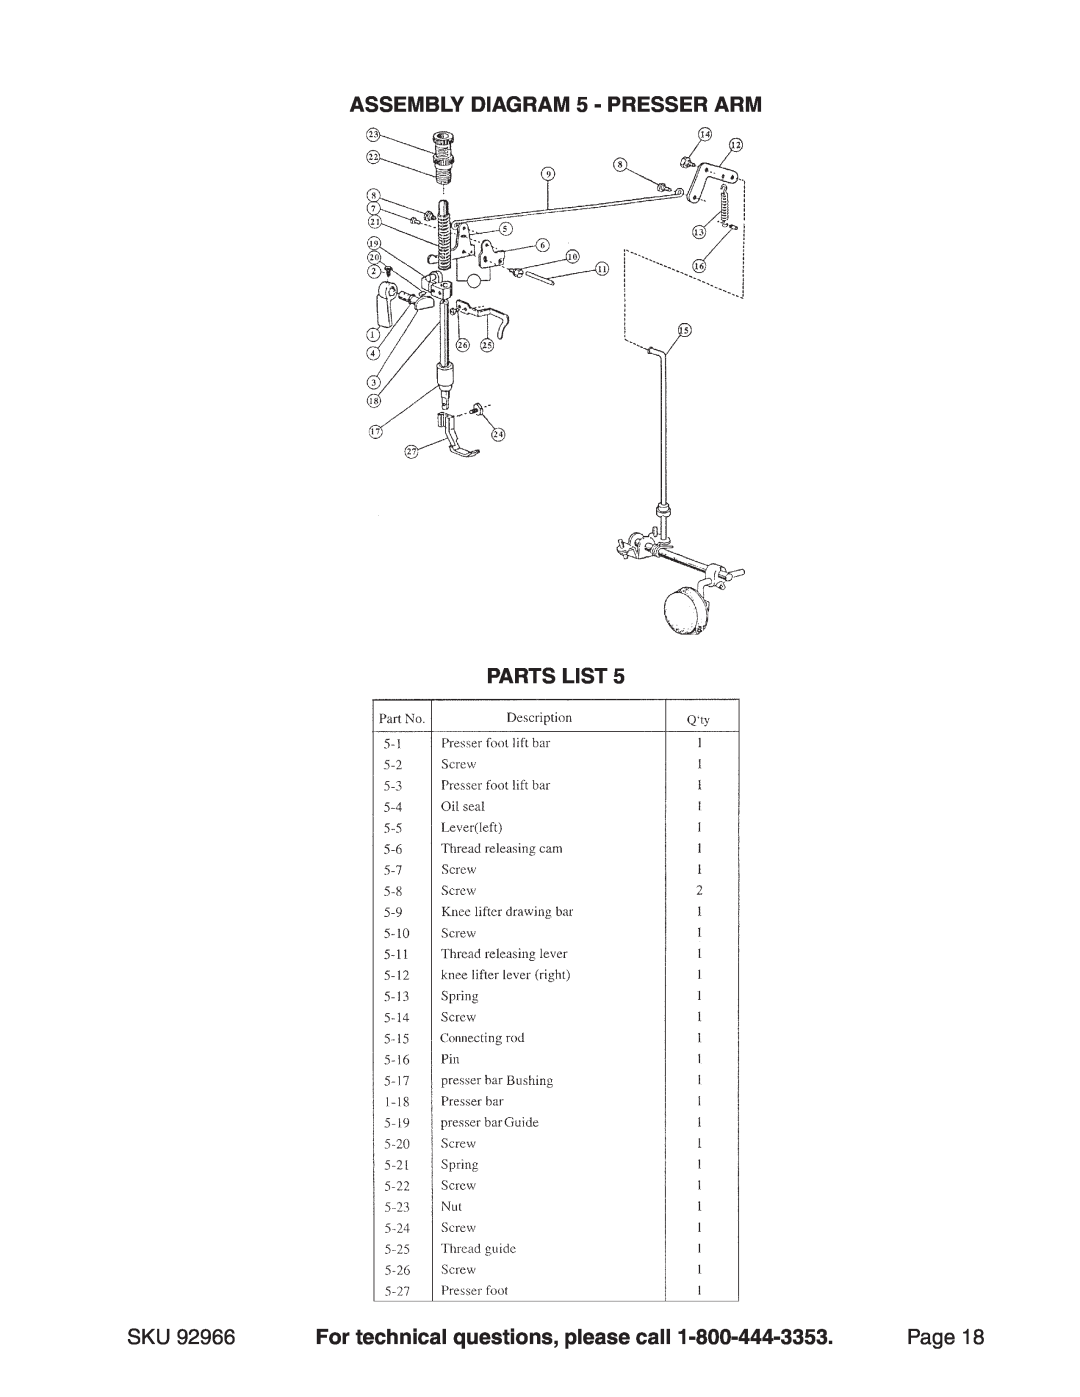 Harbor Freight Tools 92966 manual ASSEMBLY Diagram 5 - Presser Arm, Parts List, For technical questions, please call, Page 